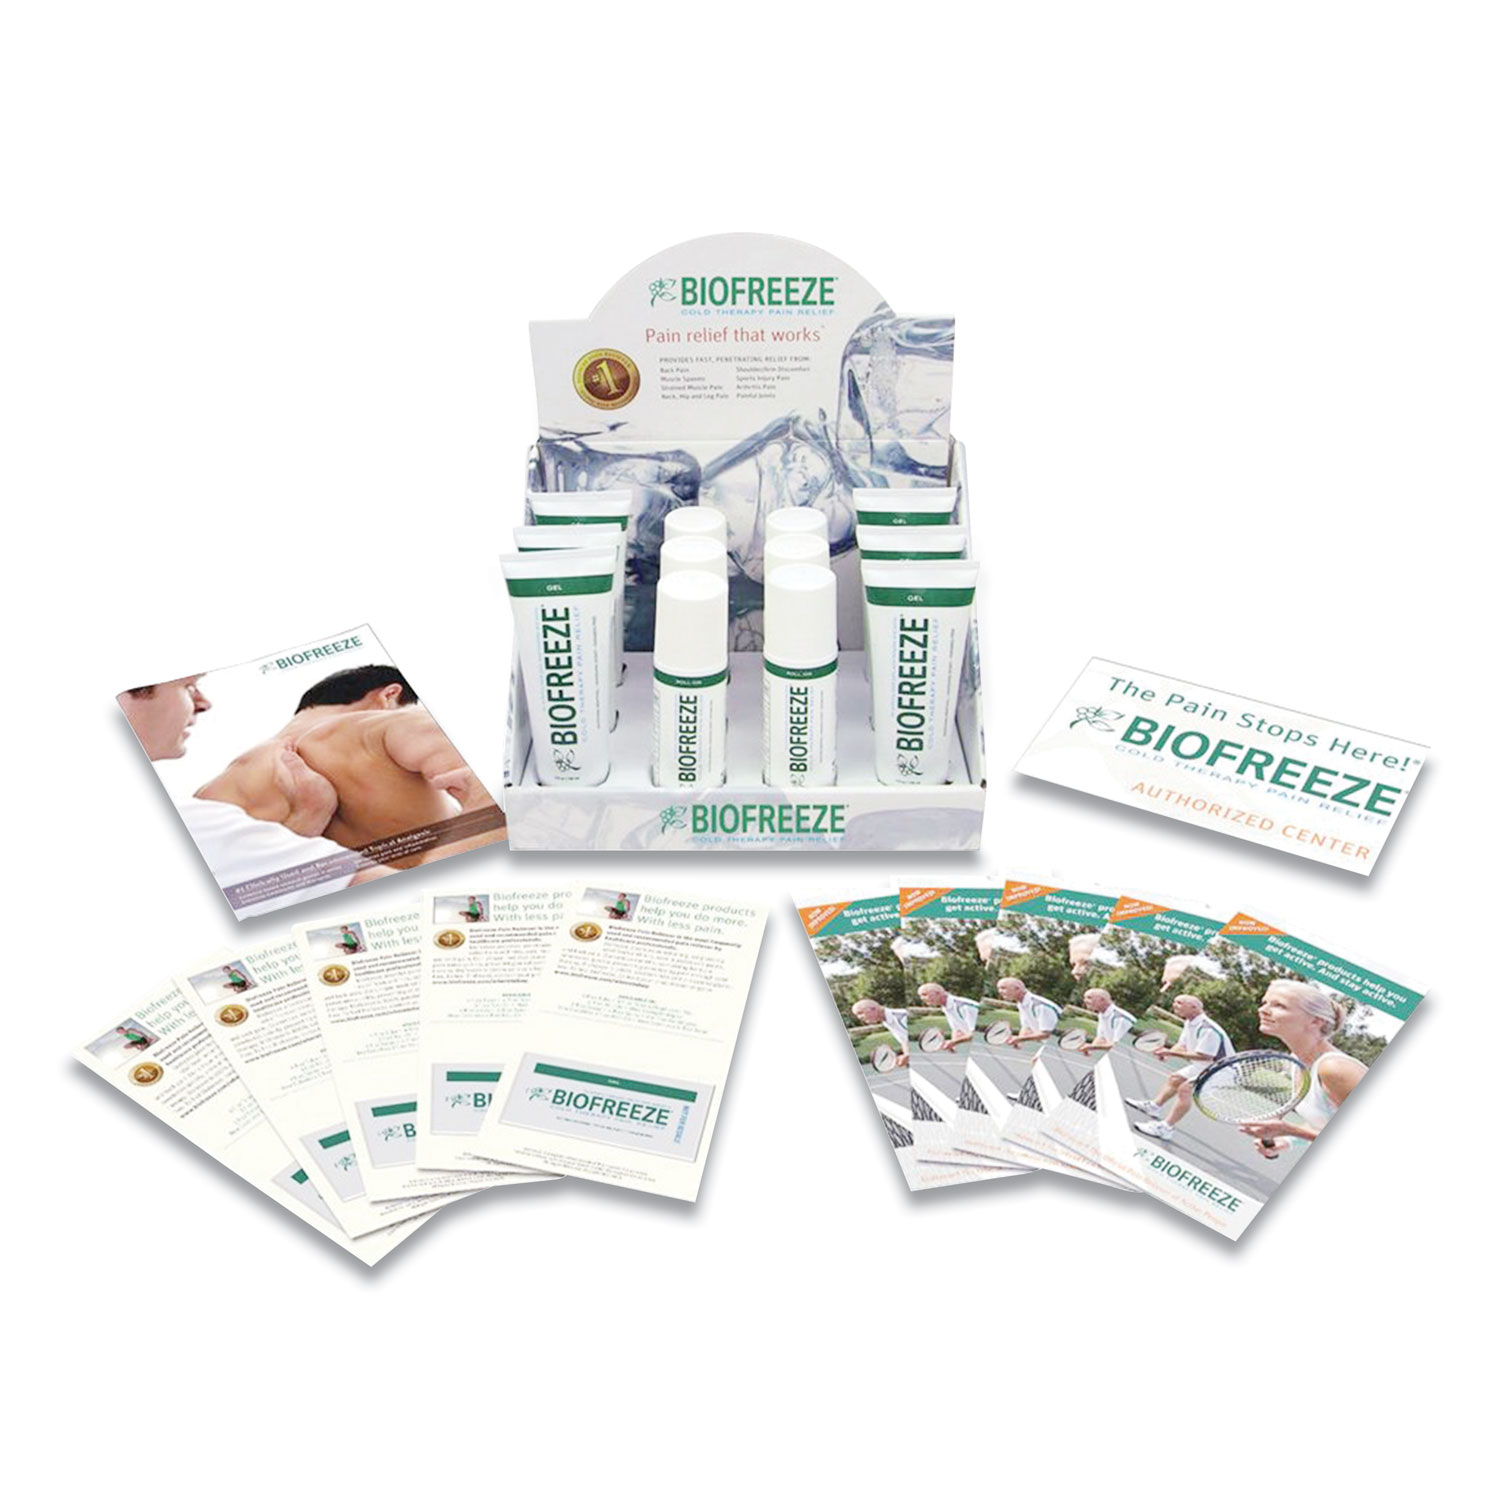 BIOFREEZE® Professional Retail Starter Kit Display with Topical Analgesive Pain Reliever Roll-Ons, Gels, Sprays, 12/Set